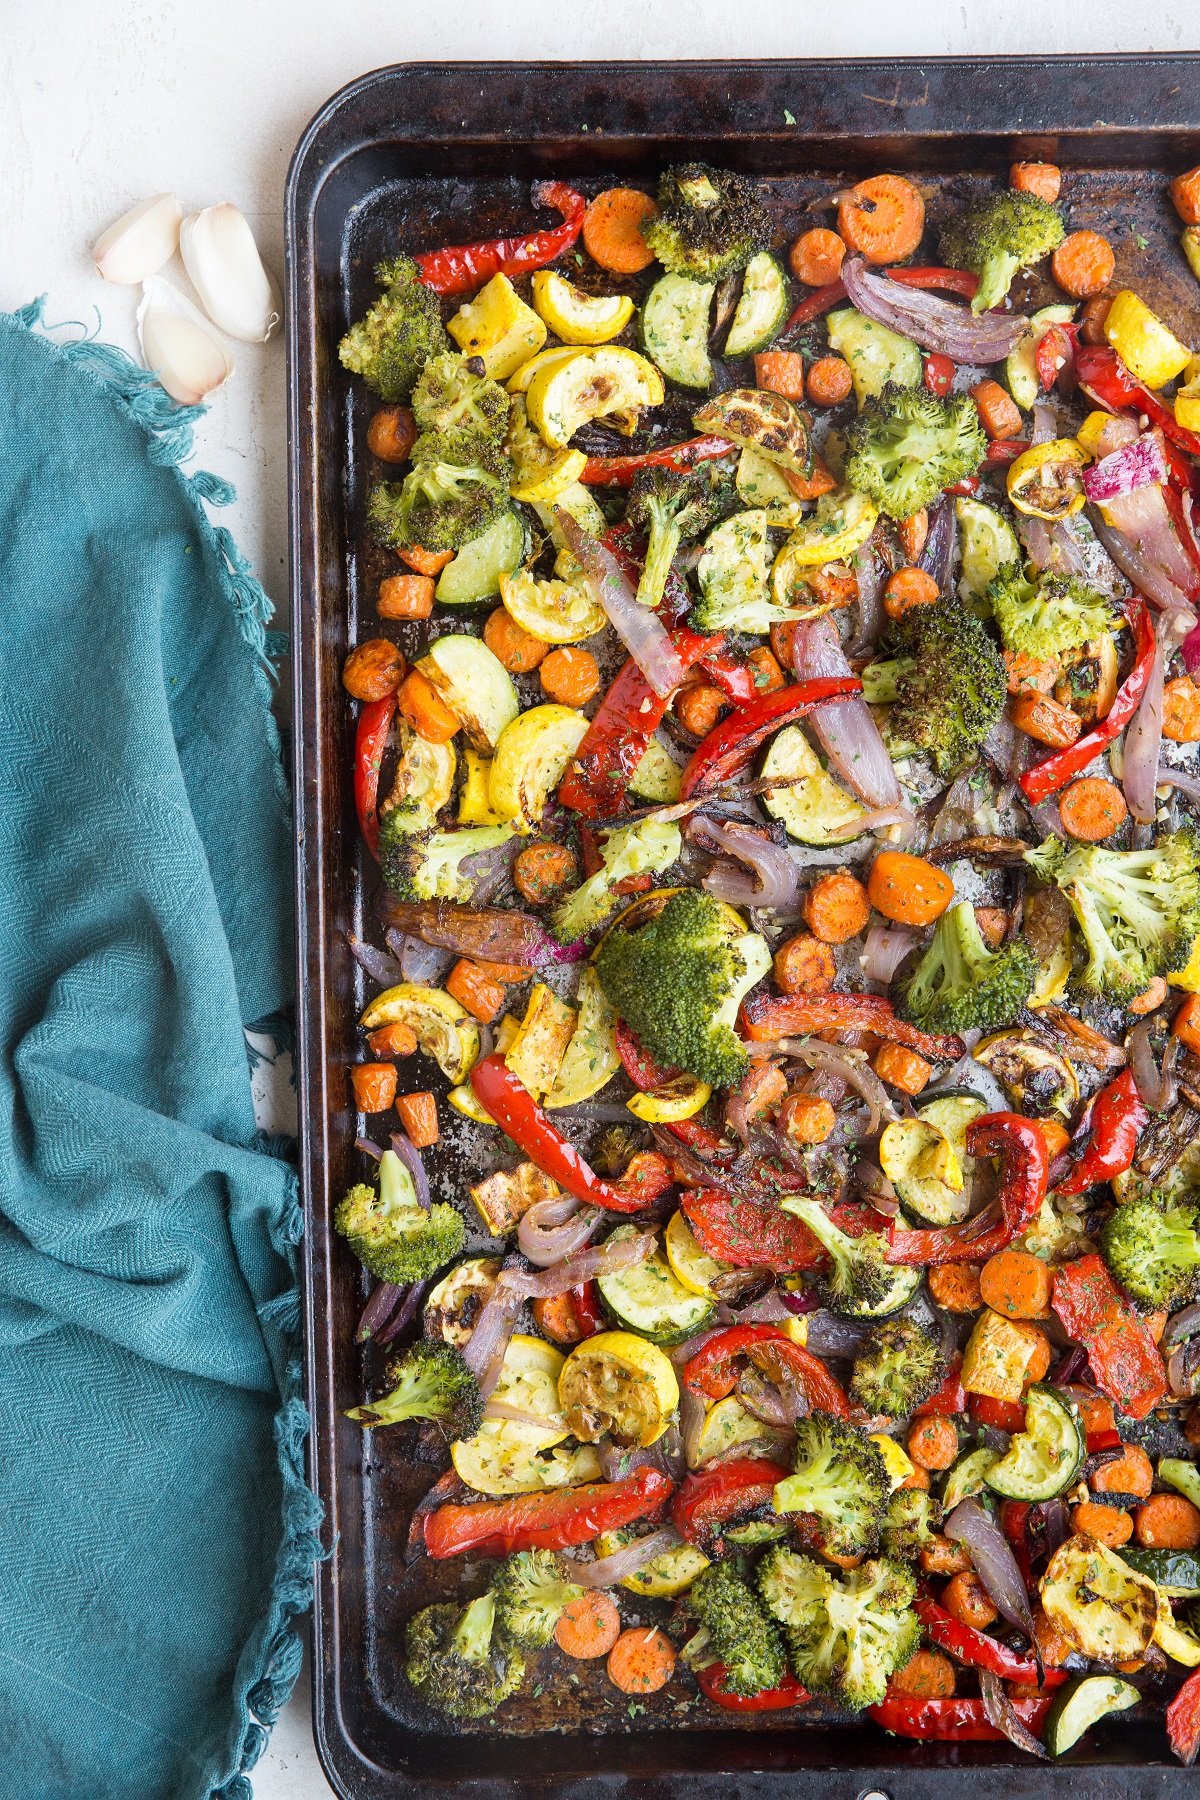 Garlic herb roasted vegetables on a large sheet pan, fresh out of the oven with a blue napkin to the side.